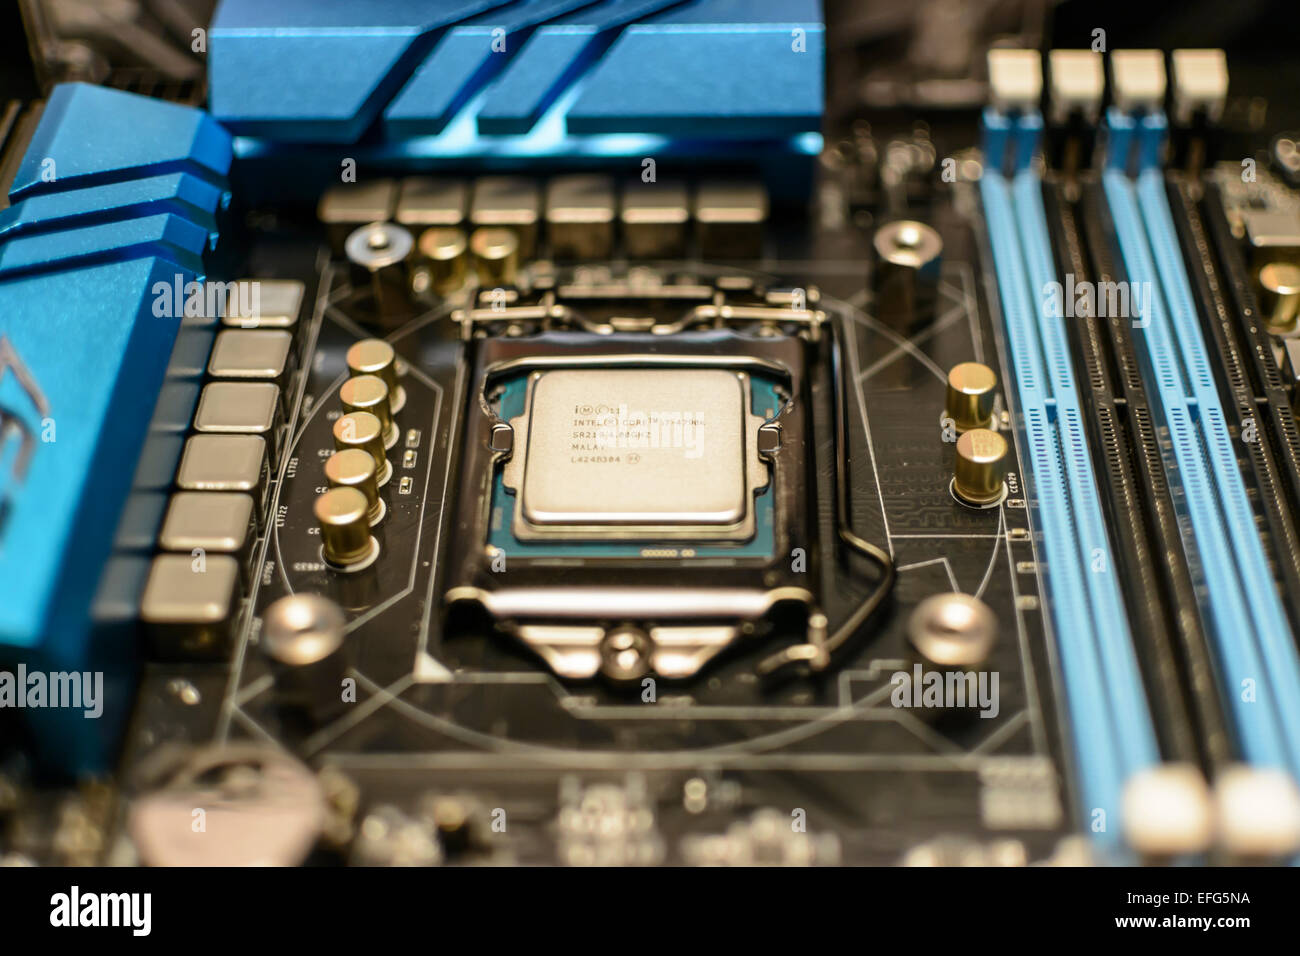 Intel i7 4790K CPU fitted into a computer motherboard without a heatsink. Stock Photo